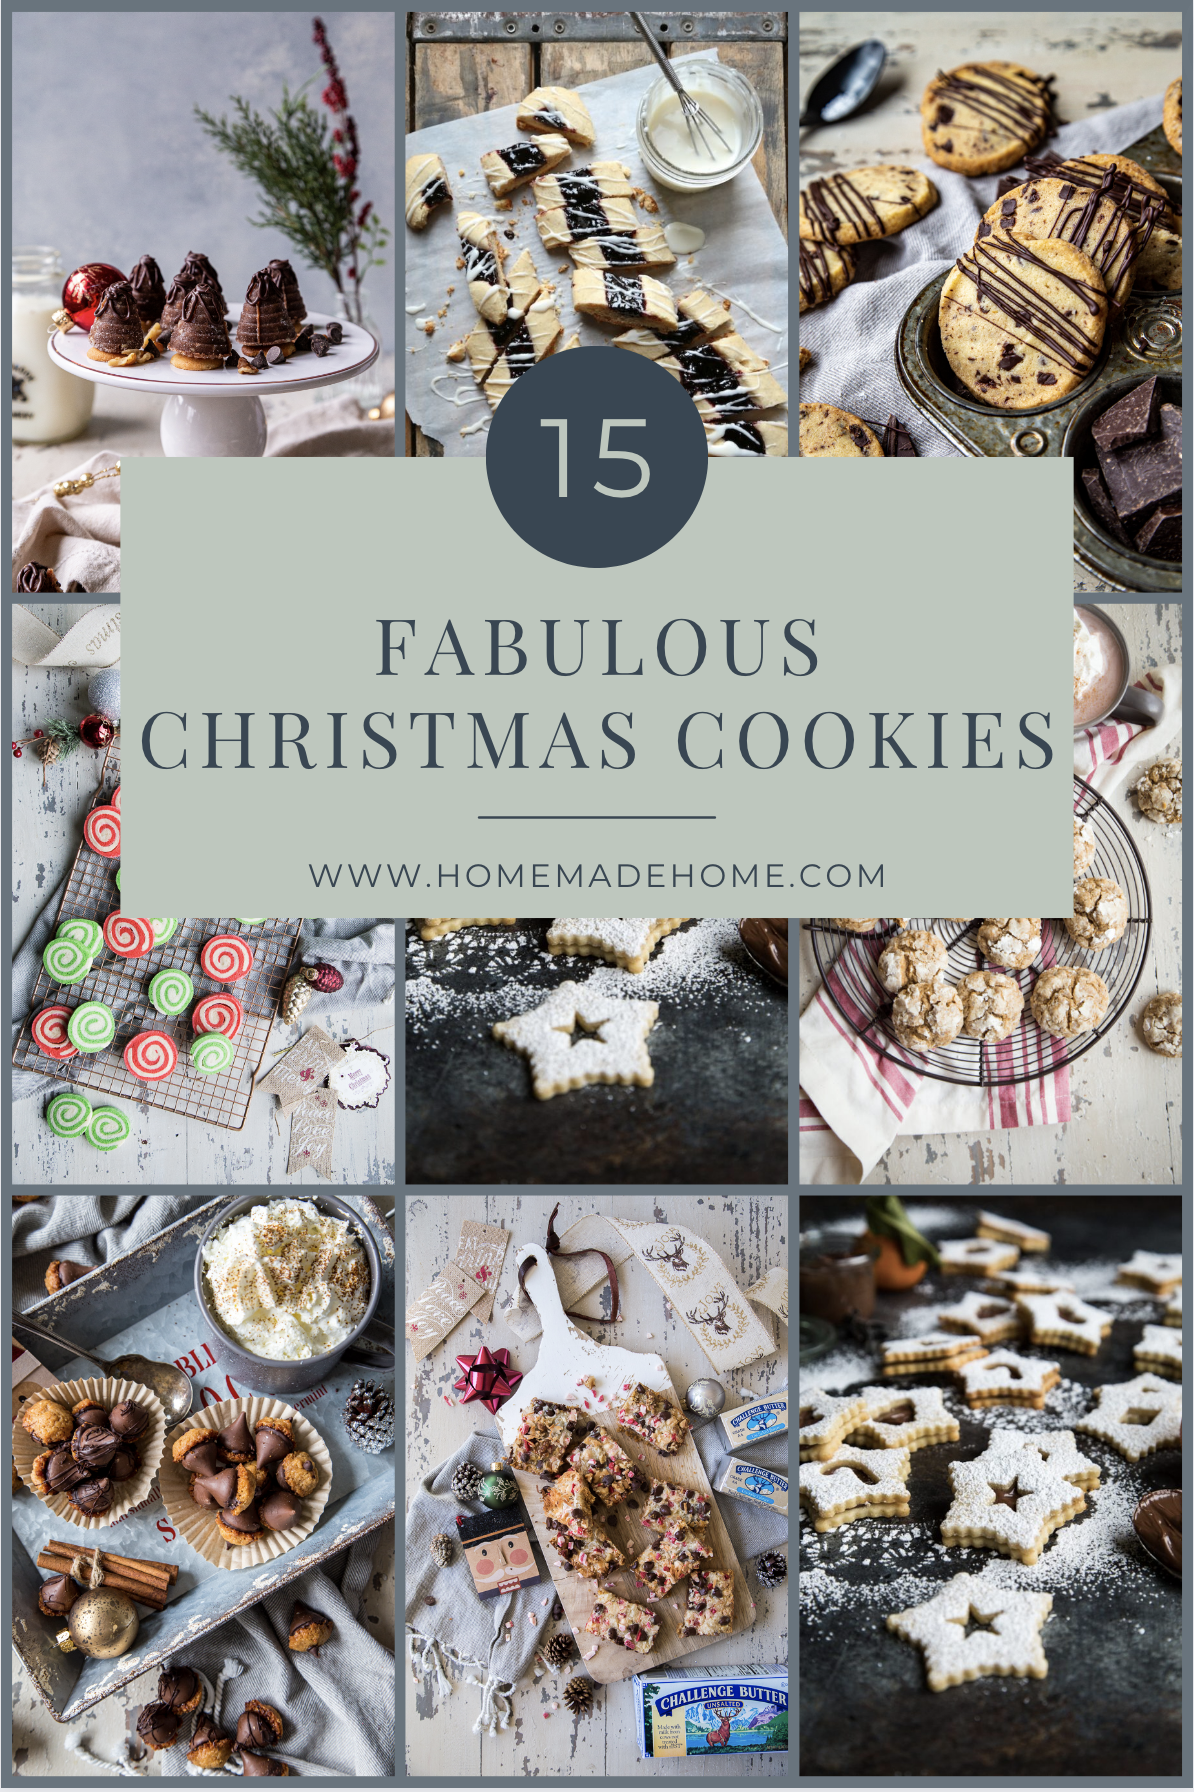 collage of christmas cookies with text saying "15 fabulous christmas cookies"